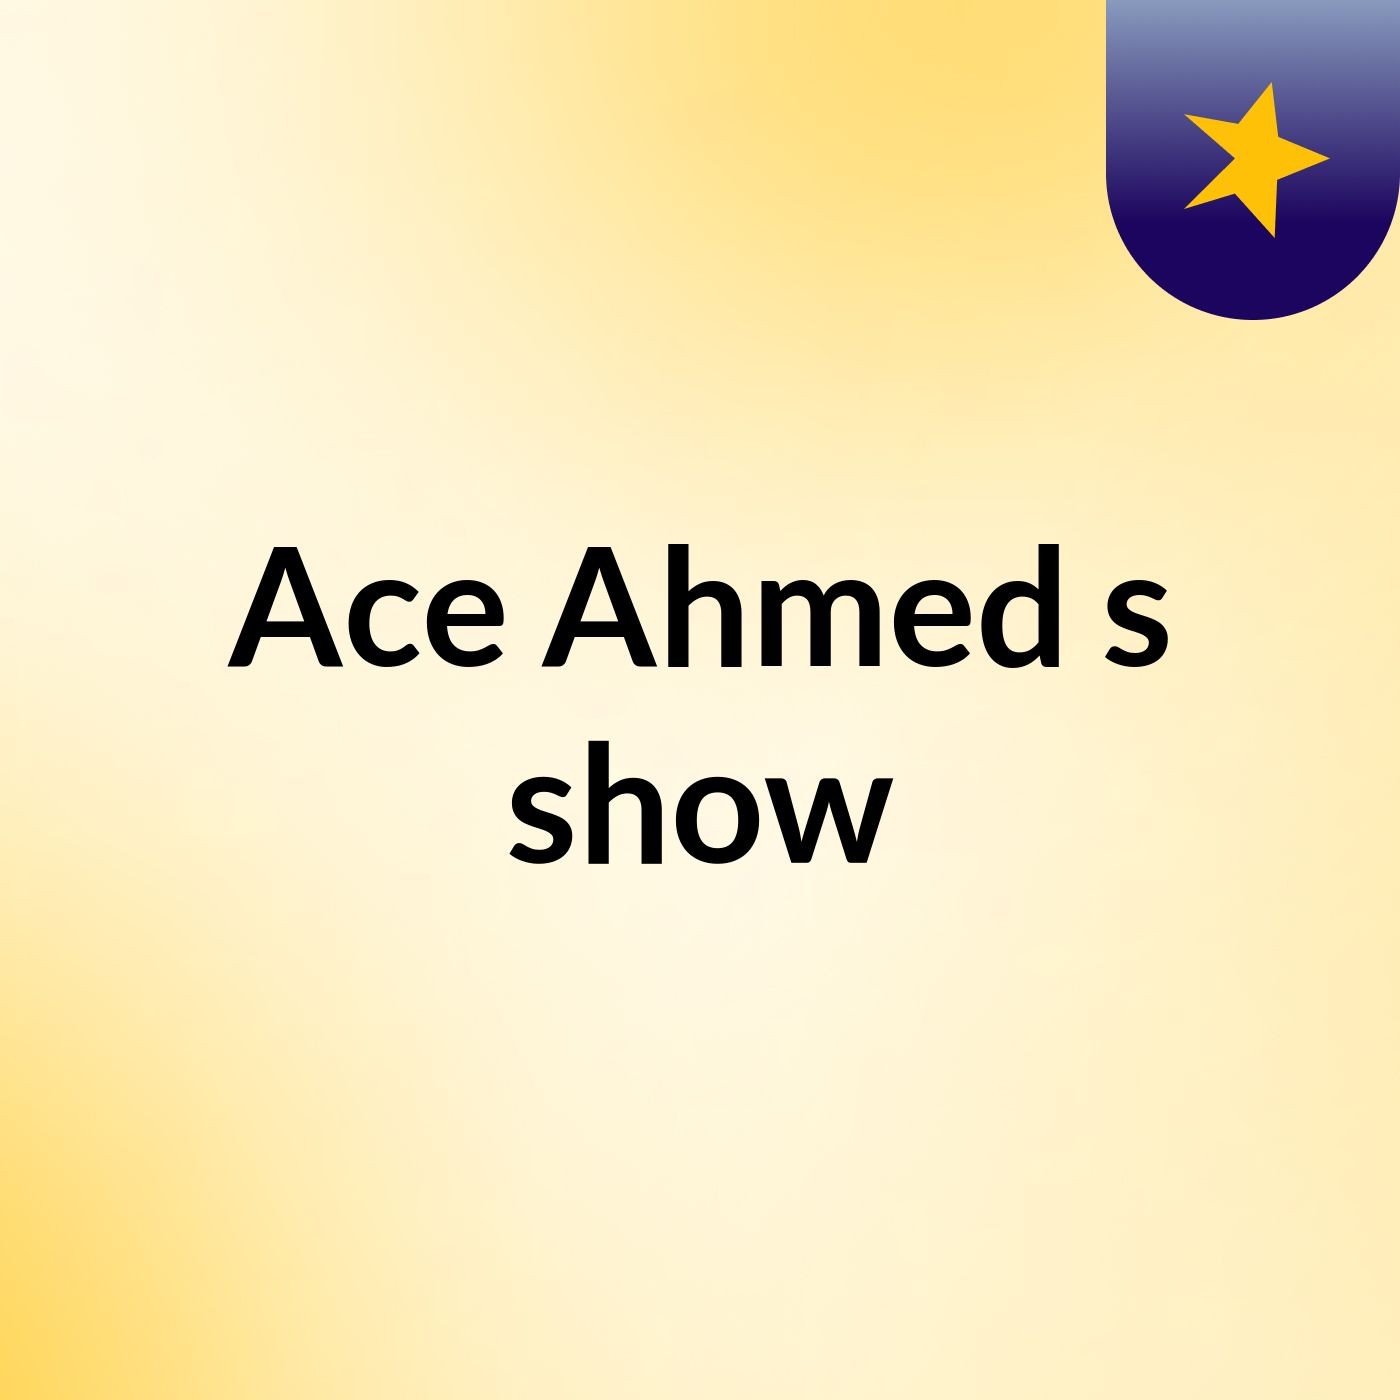 Ace Ahmed's show